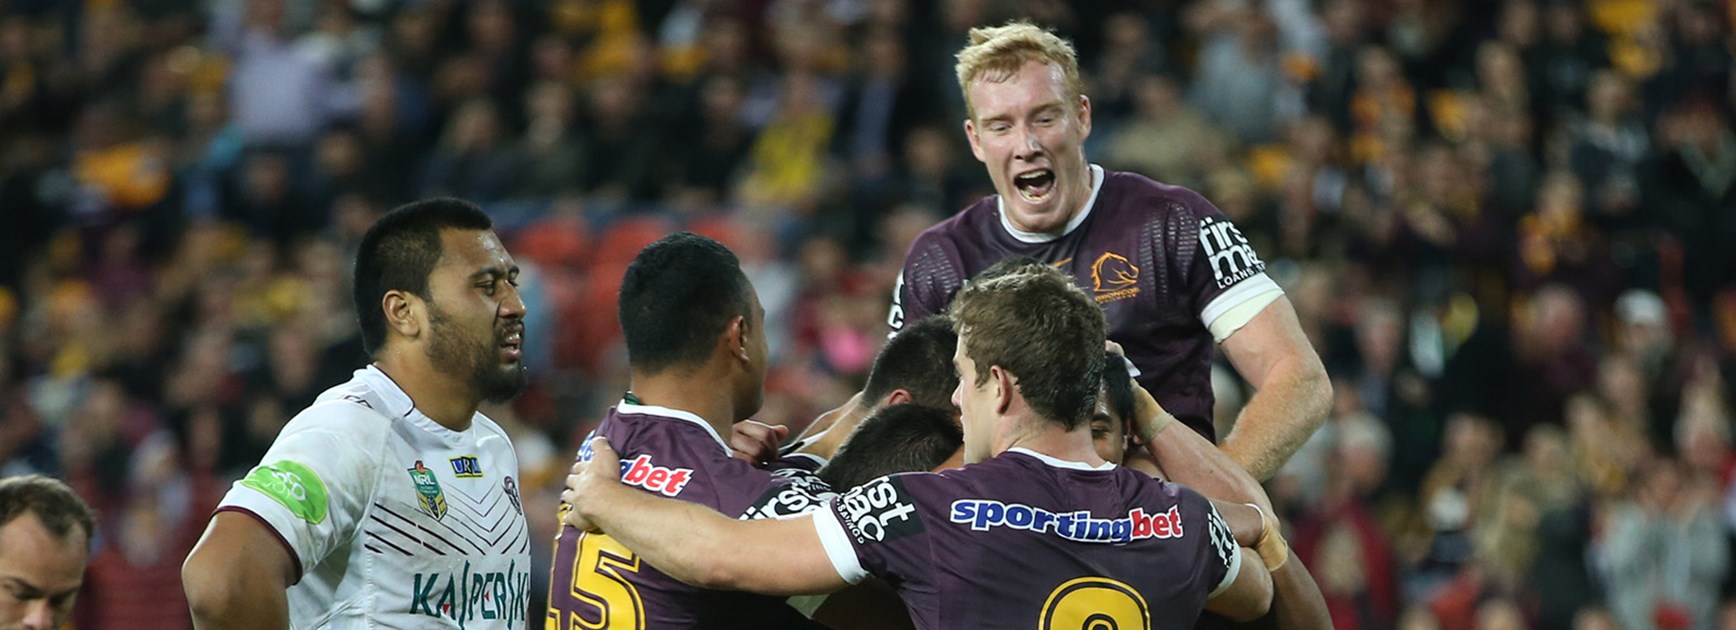 The Broncos celebrate a try against Manly at Suncorp Stadium in Round 13.